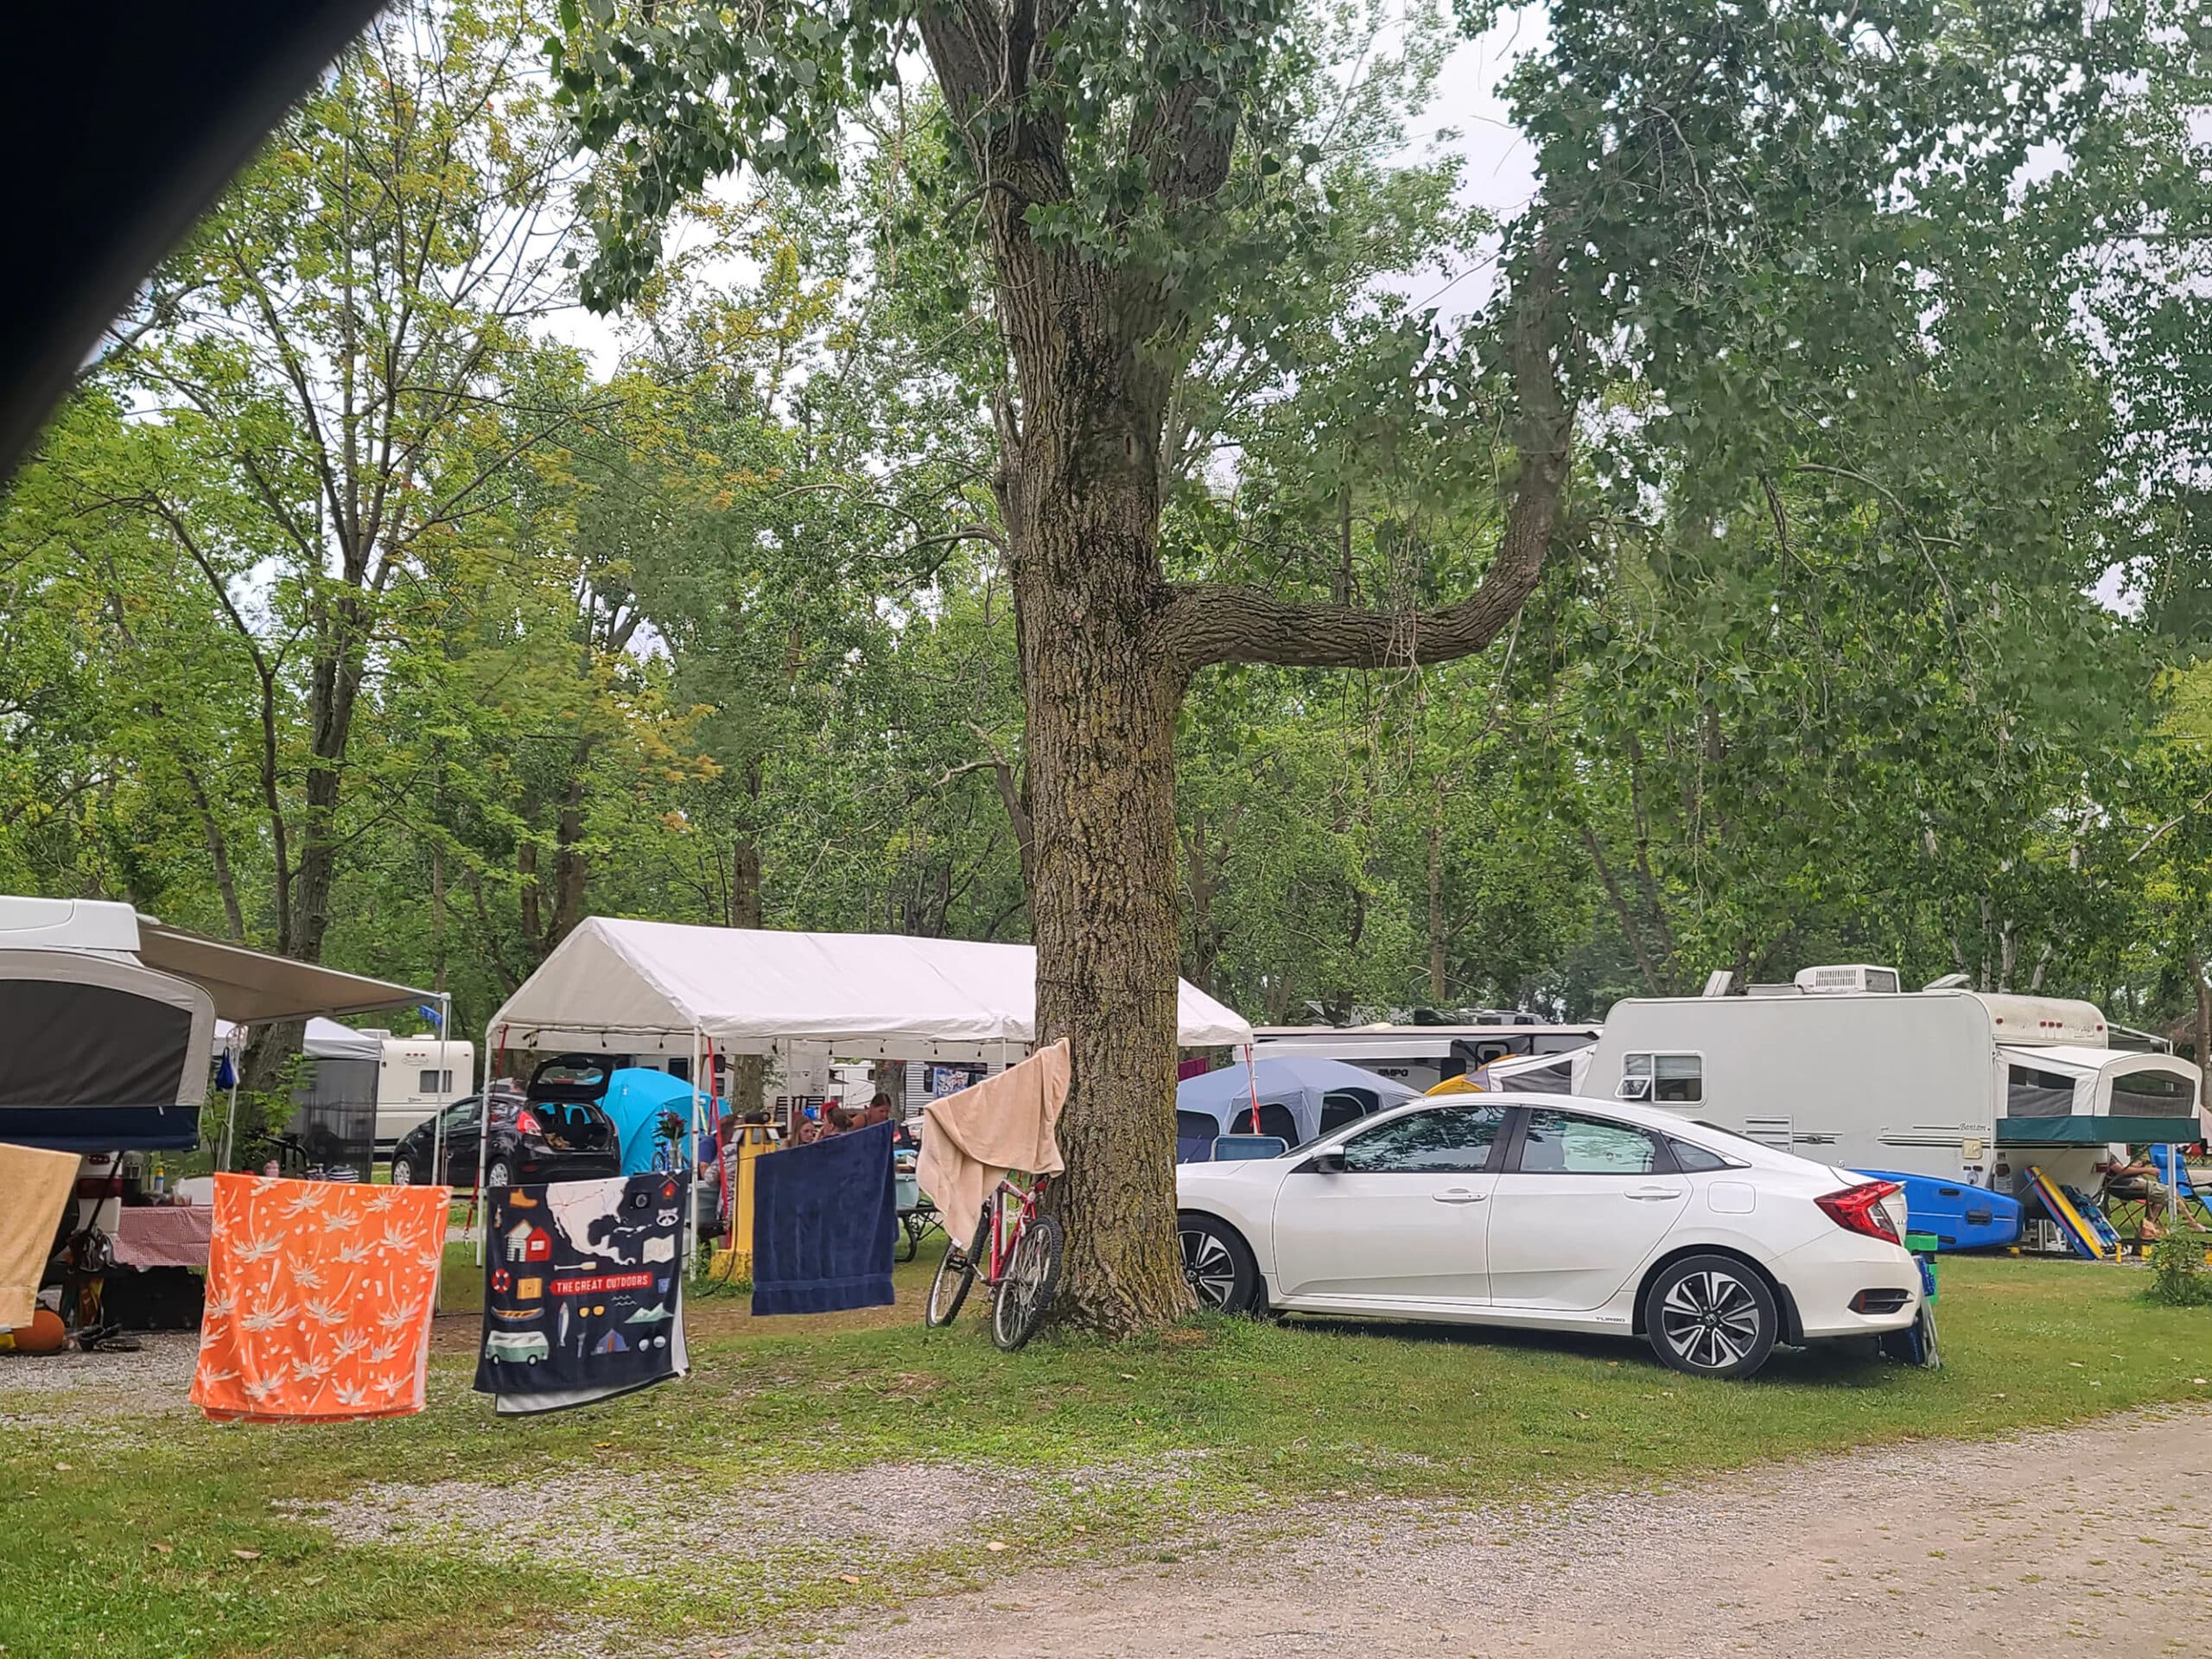 A tightly packed campground area.